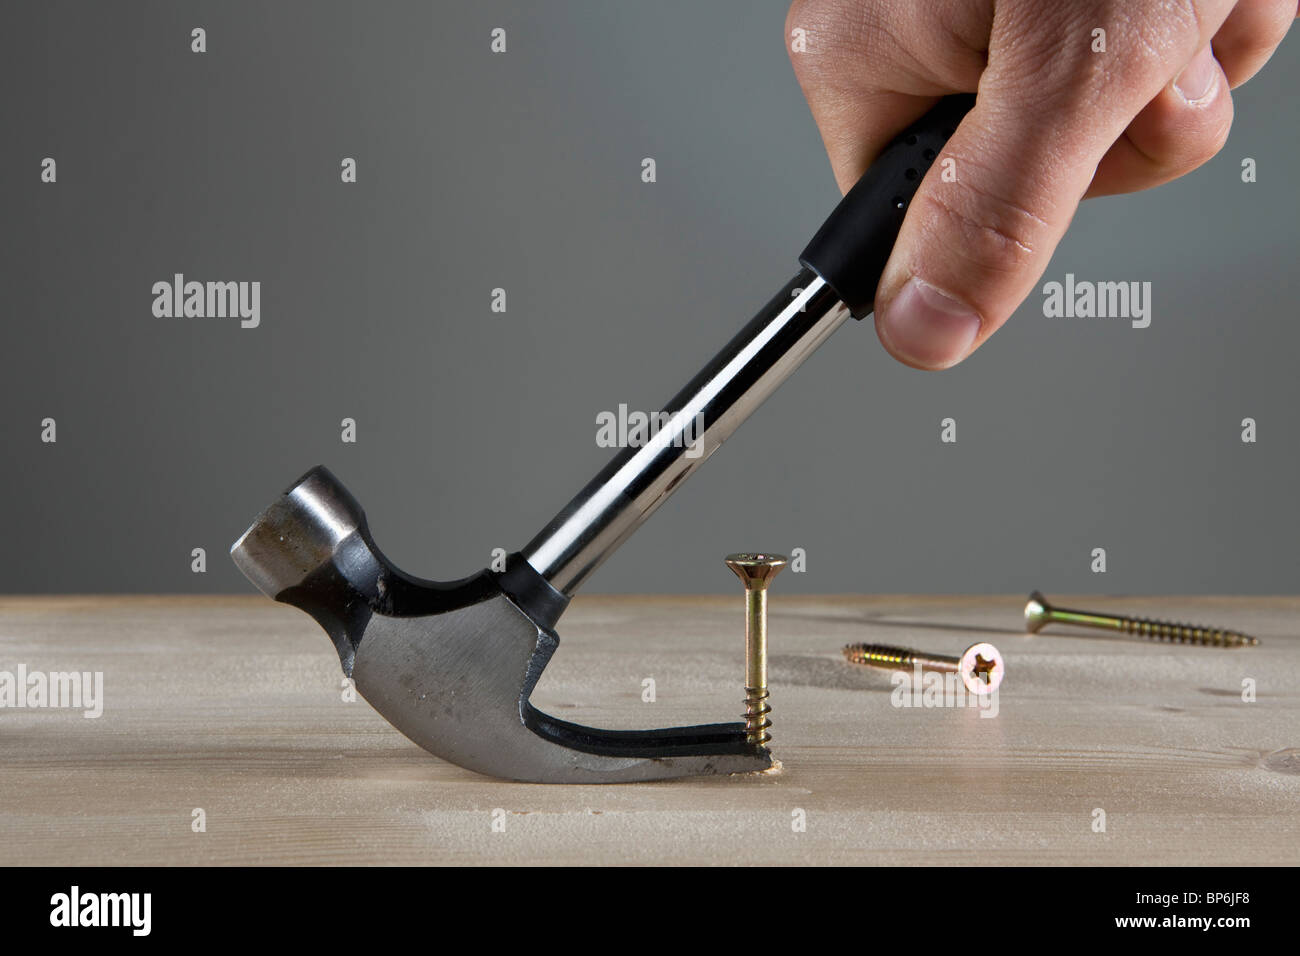 A man using a claw hammer to pull out a nail, detail of hand Stock Photo